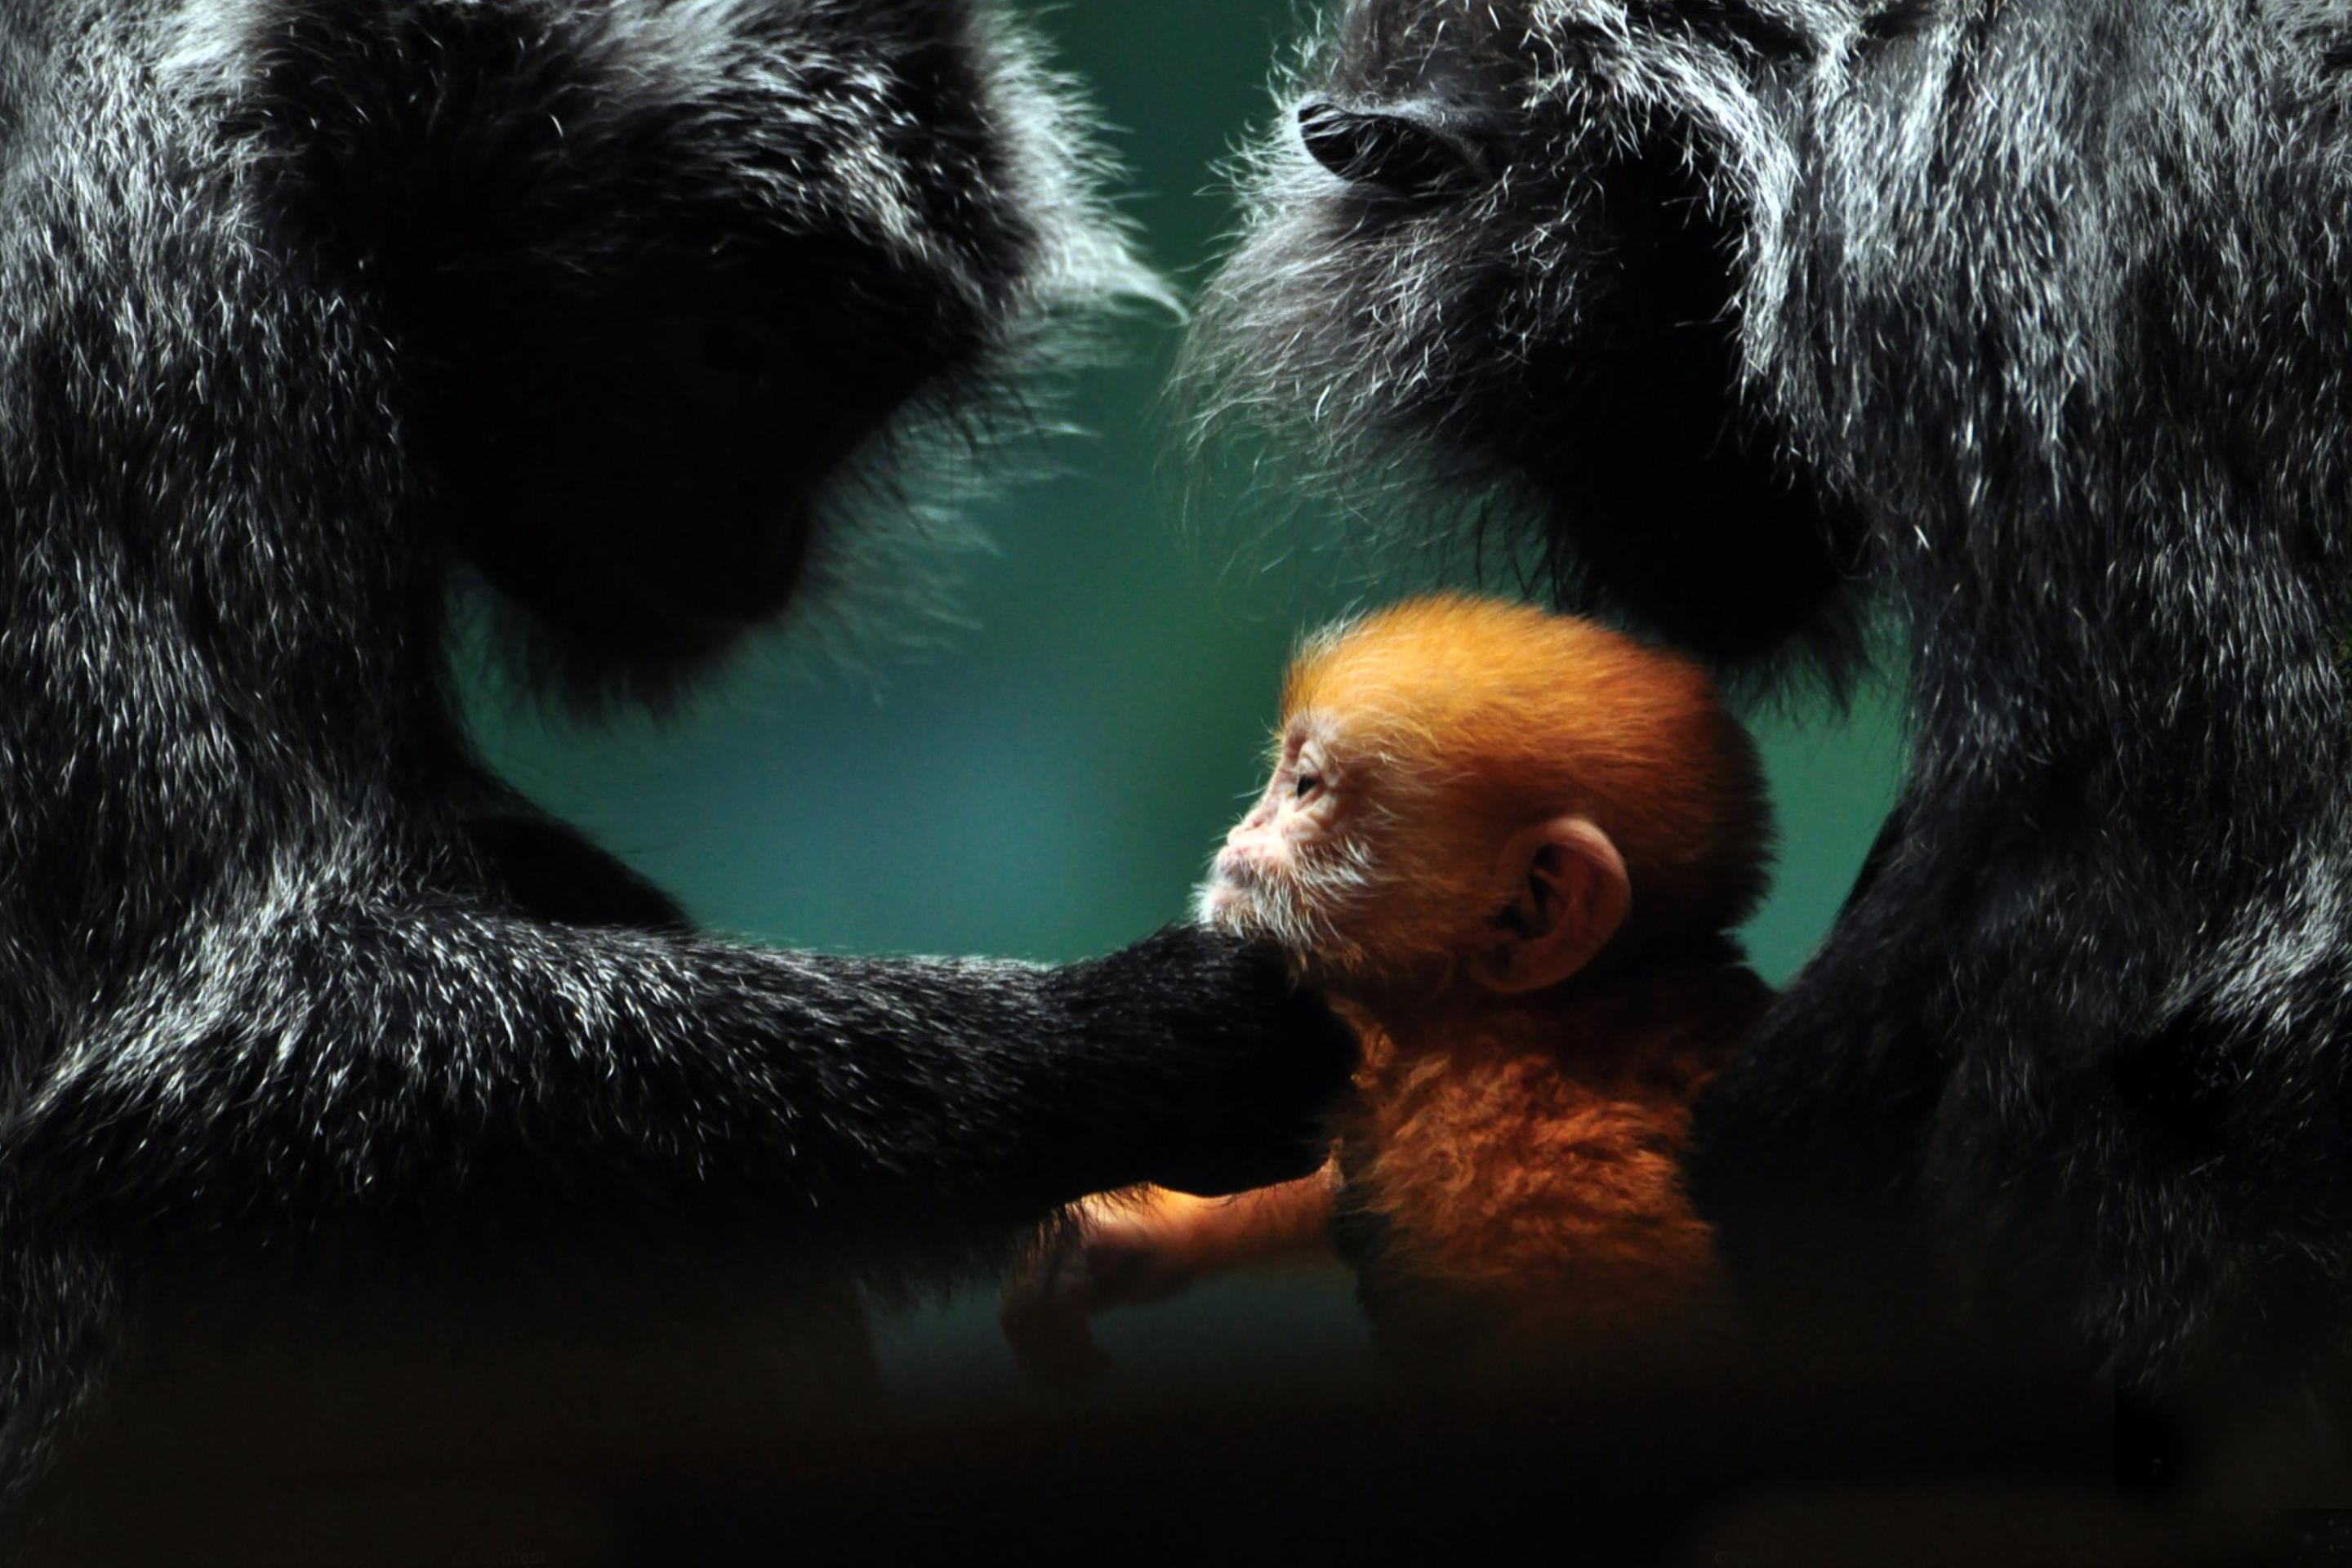 Baby Monkey With Parents wallpaper 2880x1920